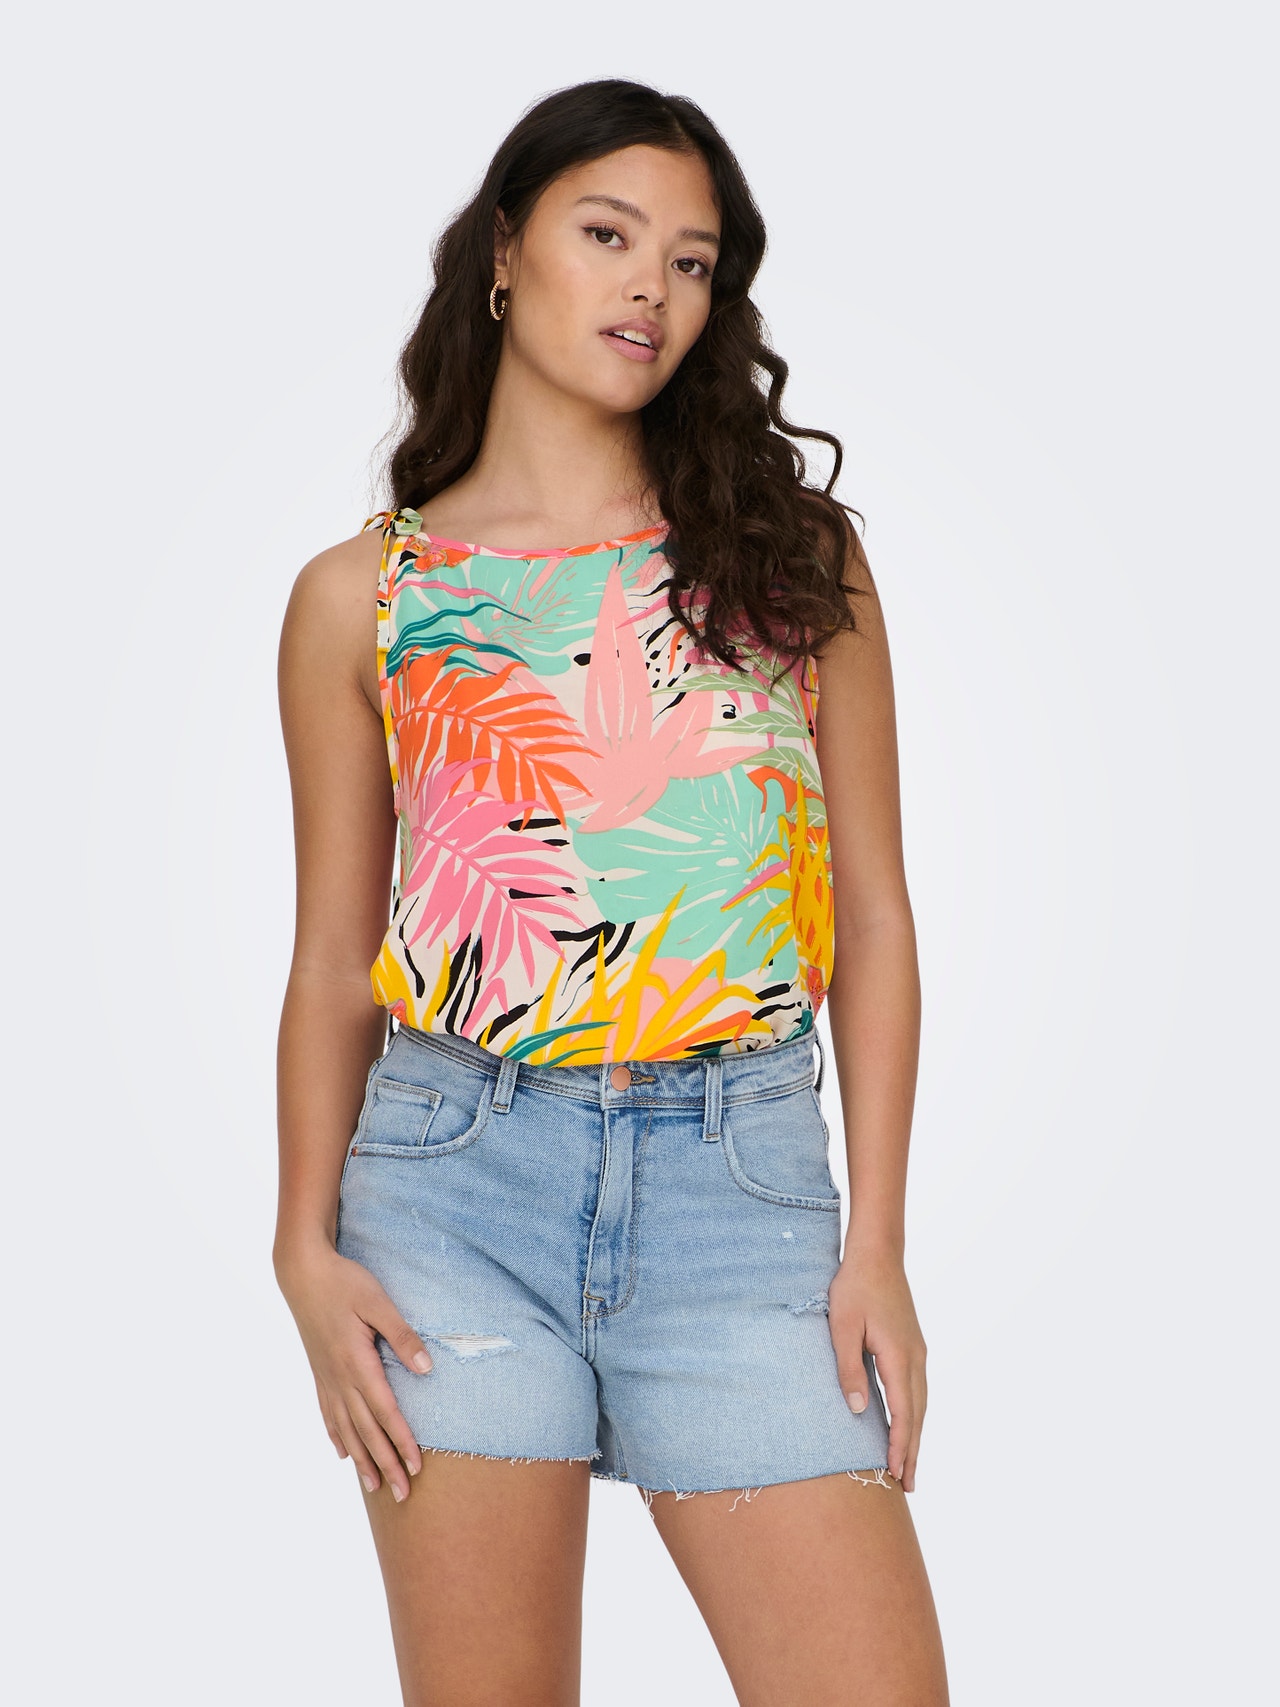 ONLY Tops Corte relaxed Cuello redondo -Cloud Dancer - 15302575